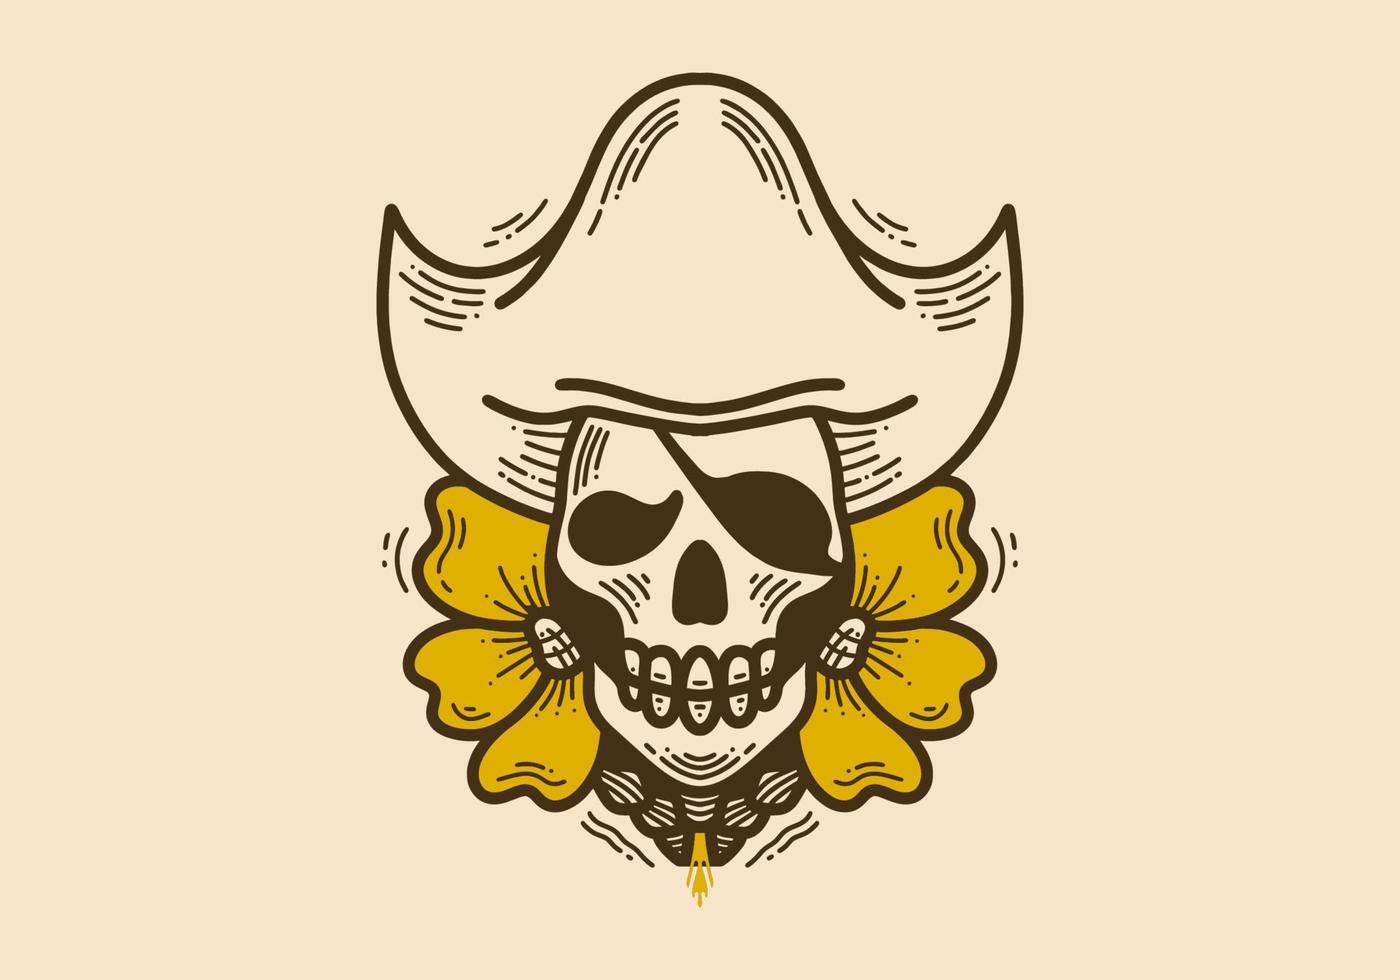 Vintage style illustration of a skull wearing a pirate hat with sunflowers on the side vector